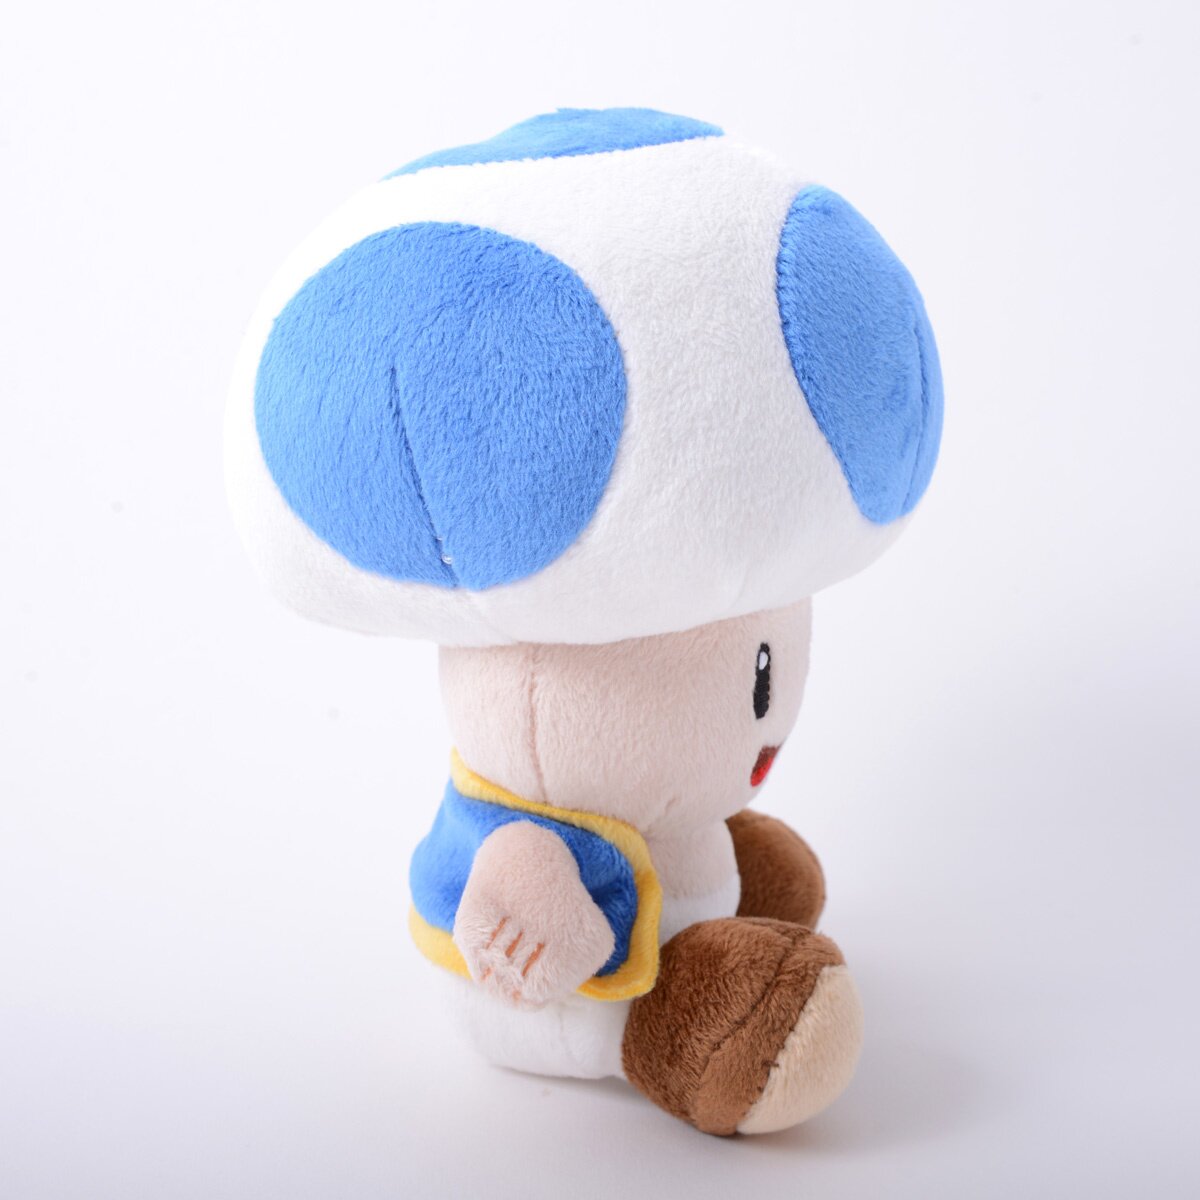  uiuoutoy Blue Toad Plush Mushroom 7'' : Toys & Games